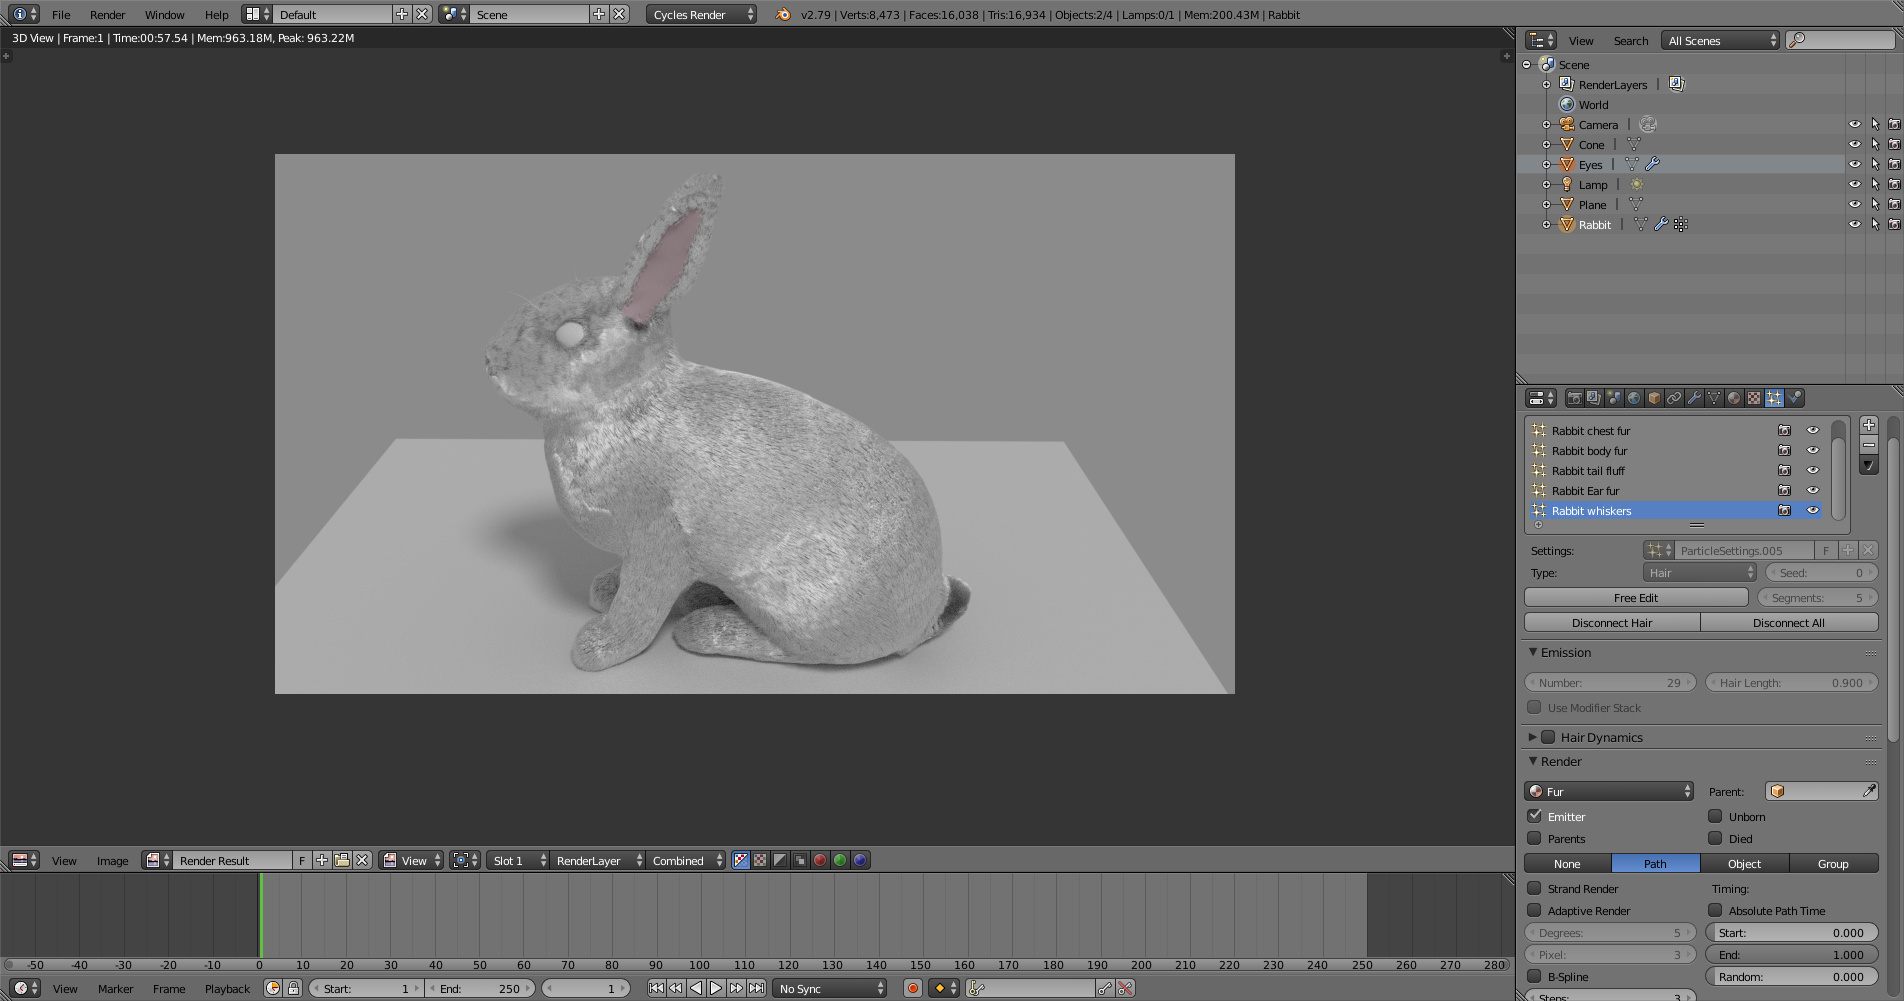 Rabbit%20and%20scene%20styling%20fur%20and%20vertex%20groups